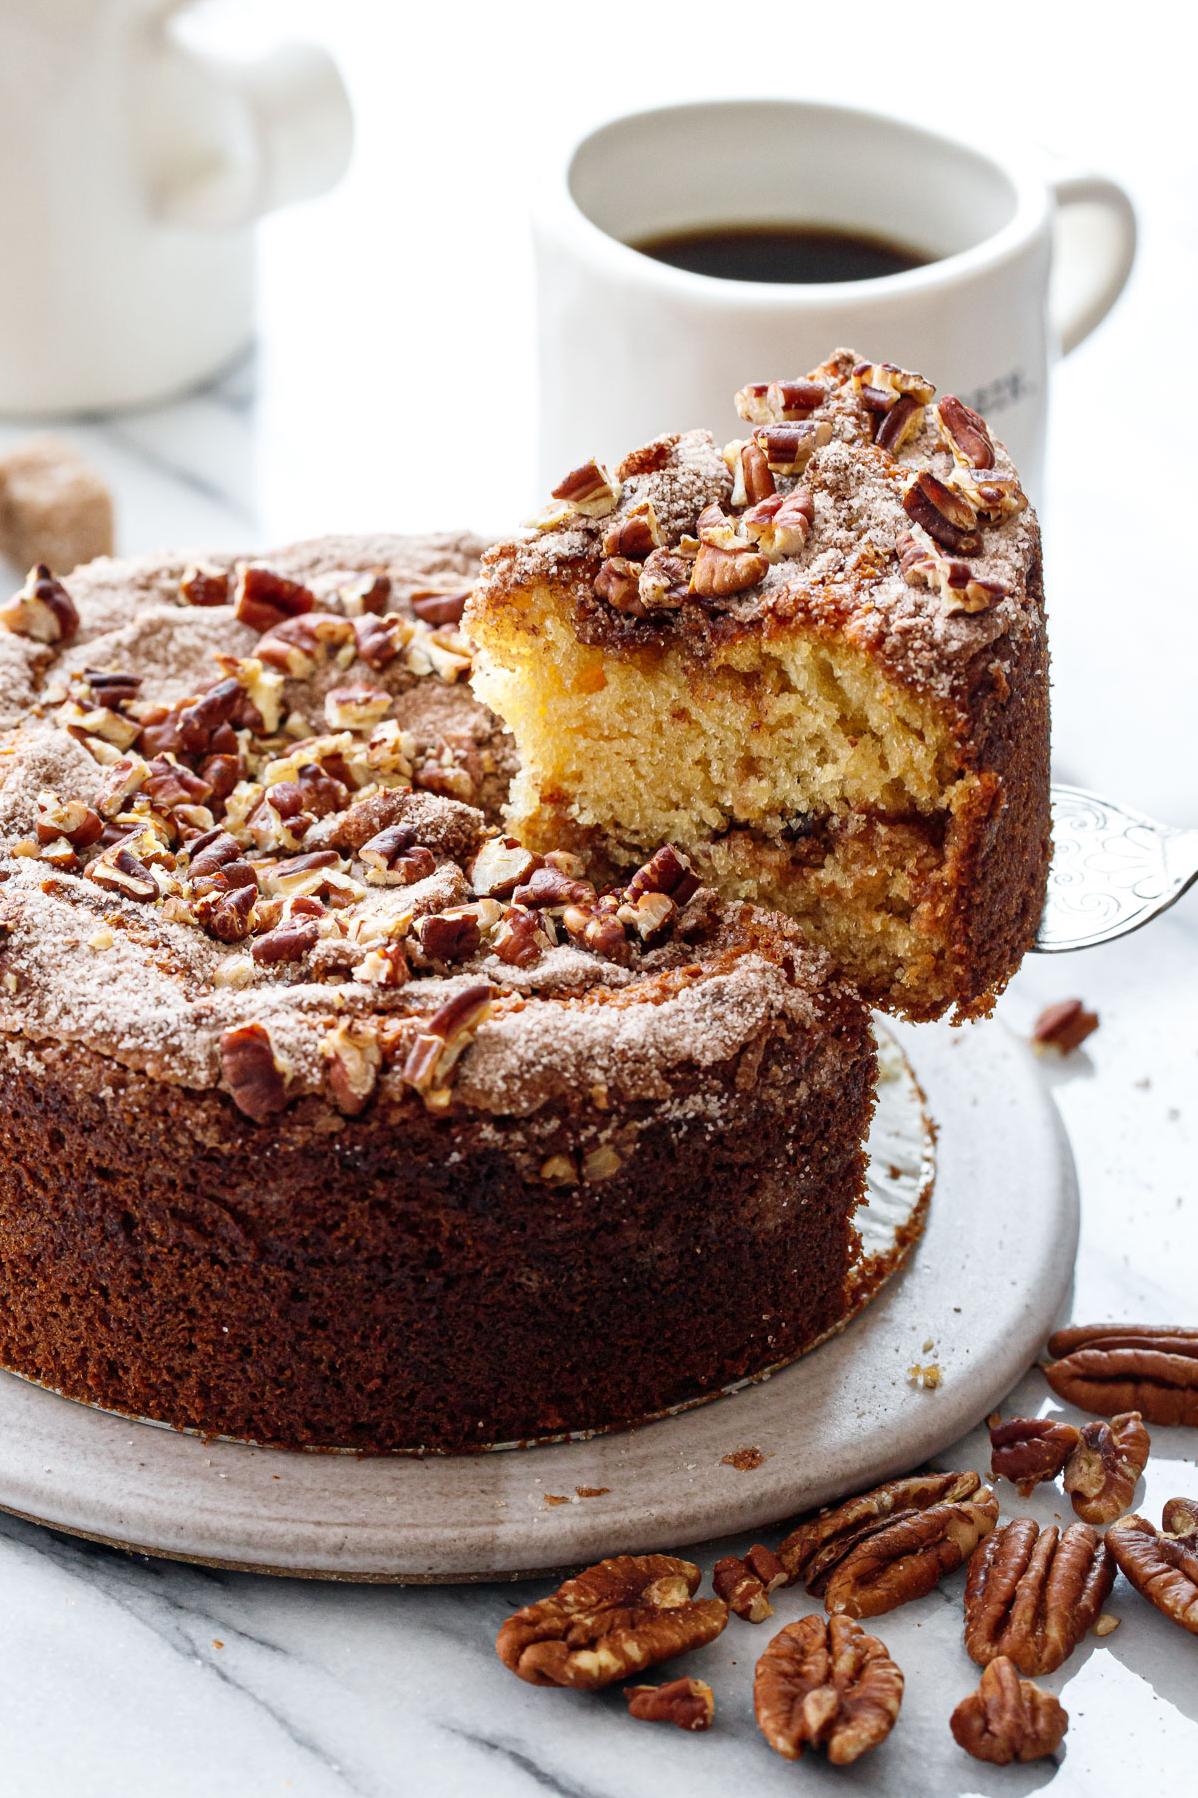  The aroma of cinnamon will fill your kitchen as you bake this beauty.